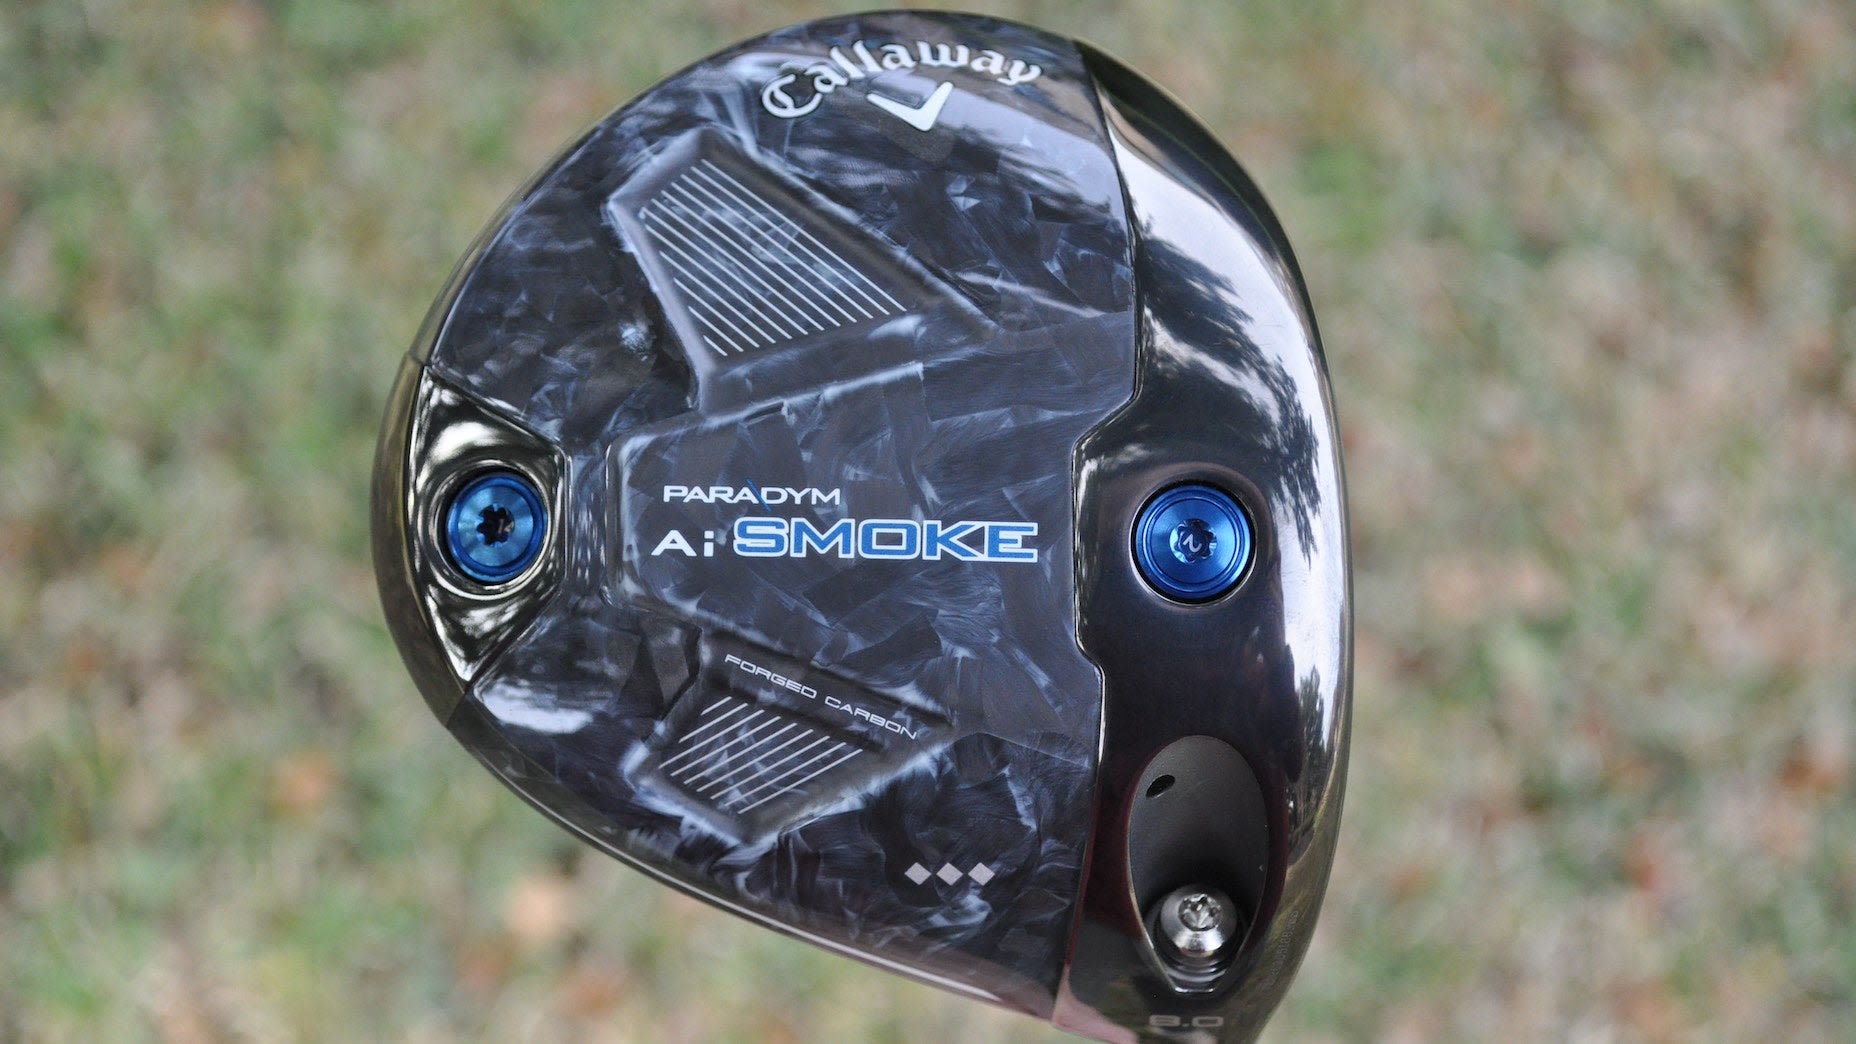 This piece of gear was crucial to Xander Schauffele's PGA Championship win